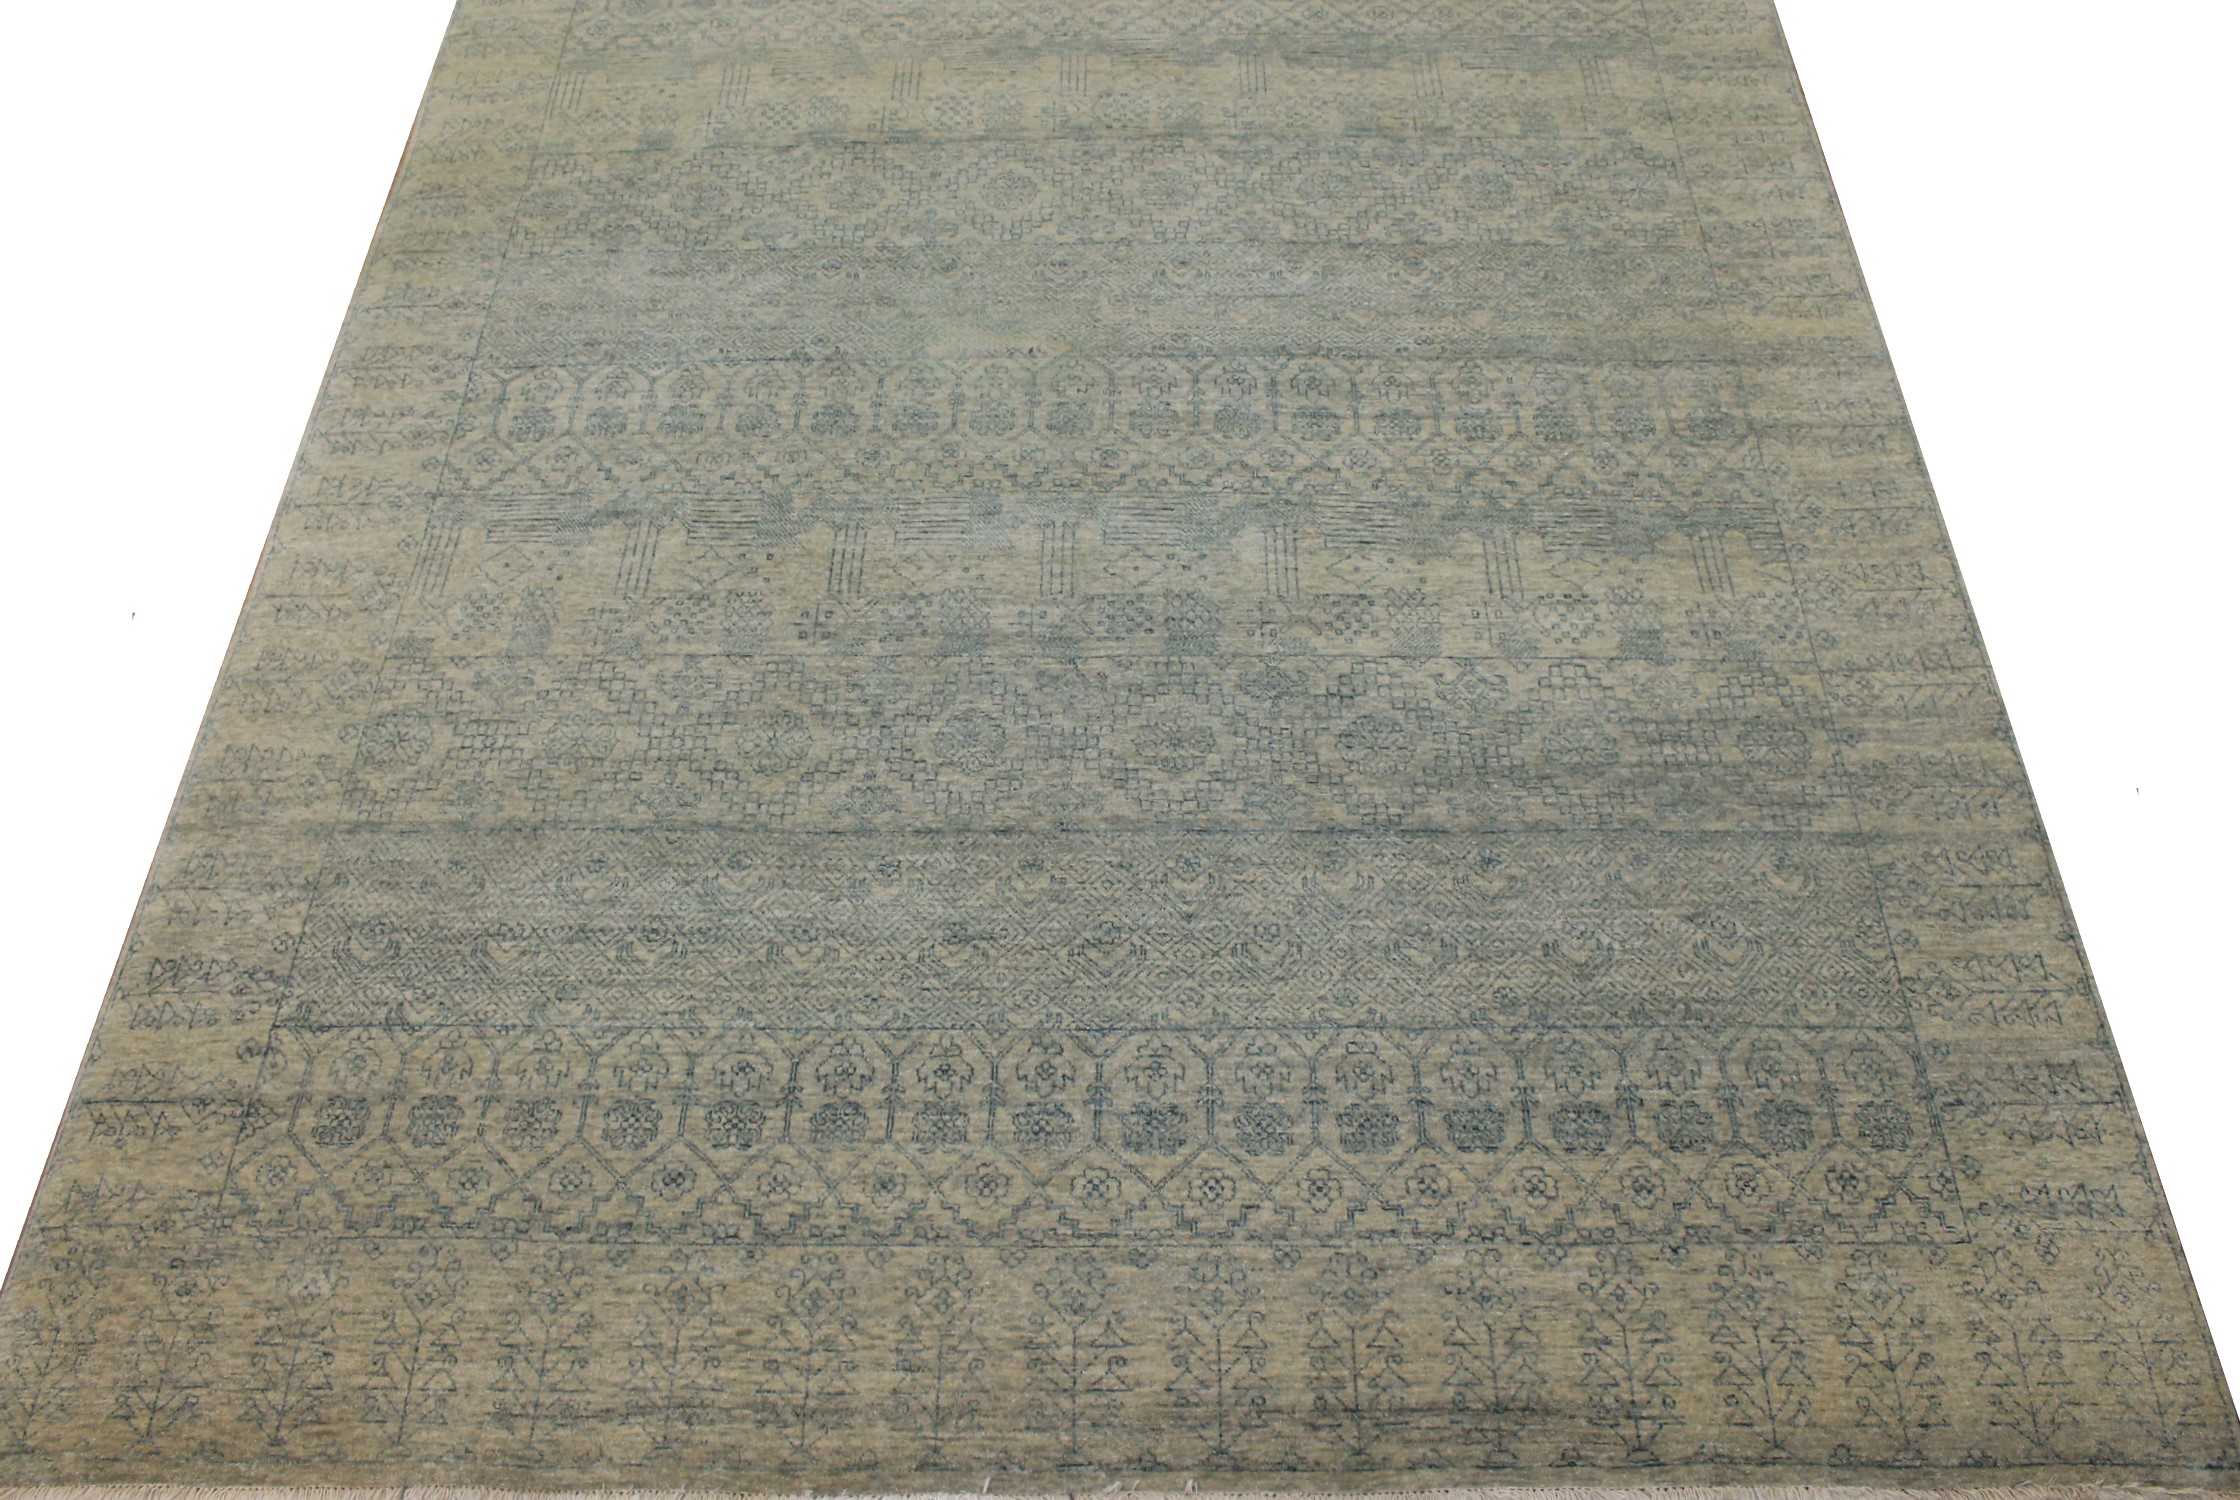 Clearance & Discount Rugs Modern Hand Knotted Wool Rug 7770 Lt. Blue - Blue Hand Knotted Rug